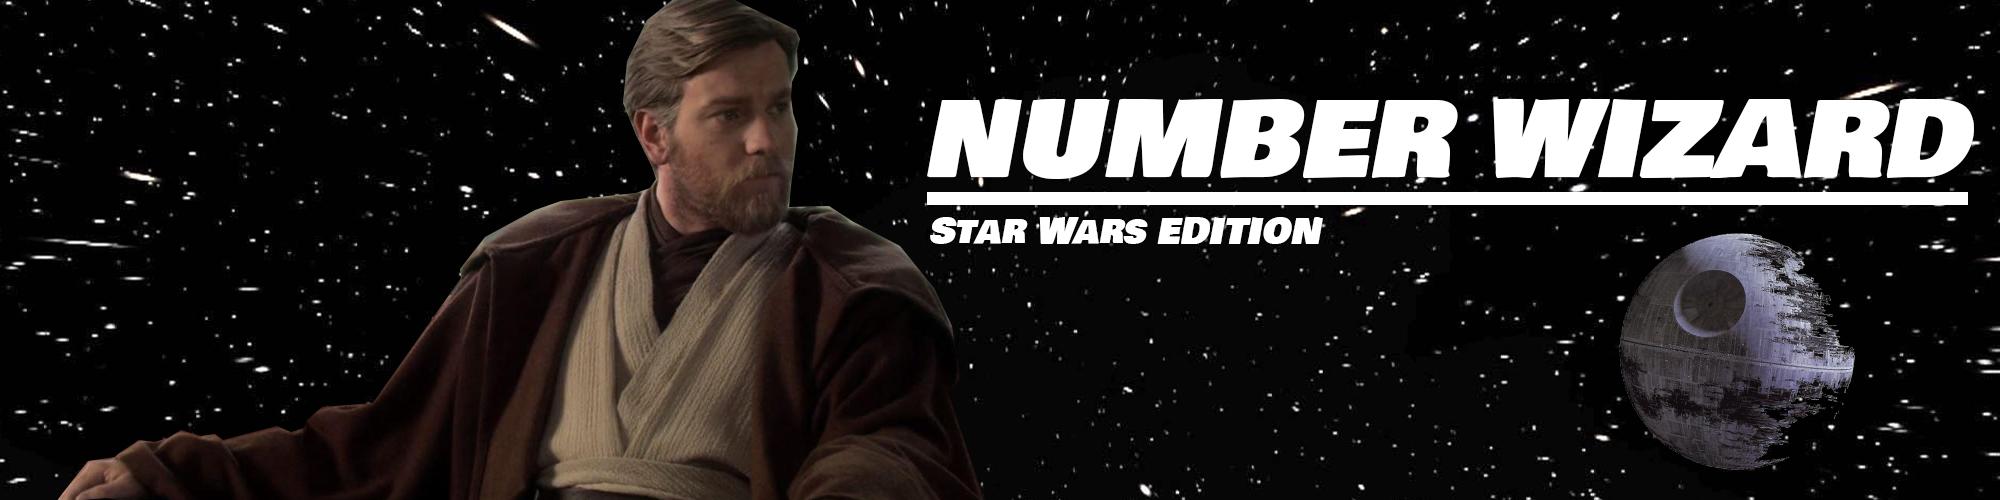 Number Wizard Star Wars Edition